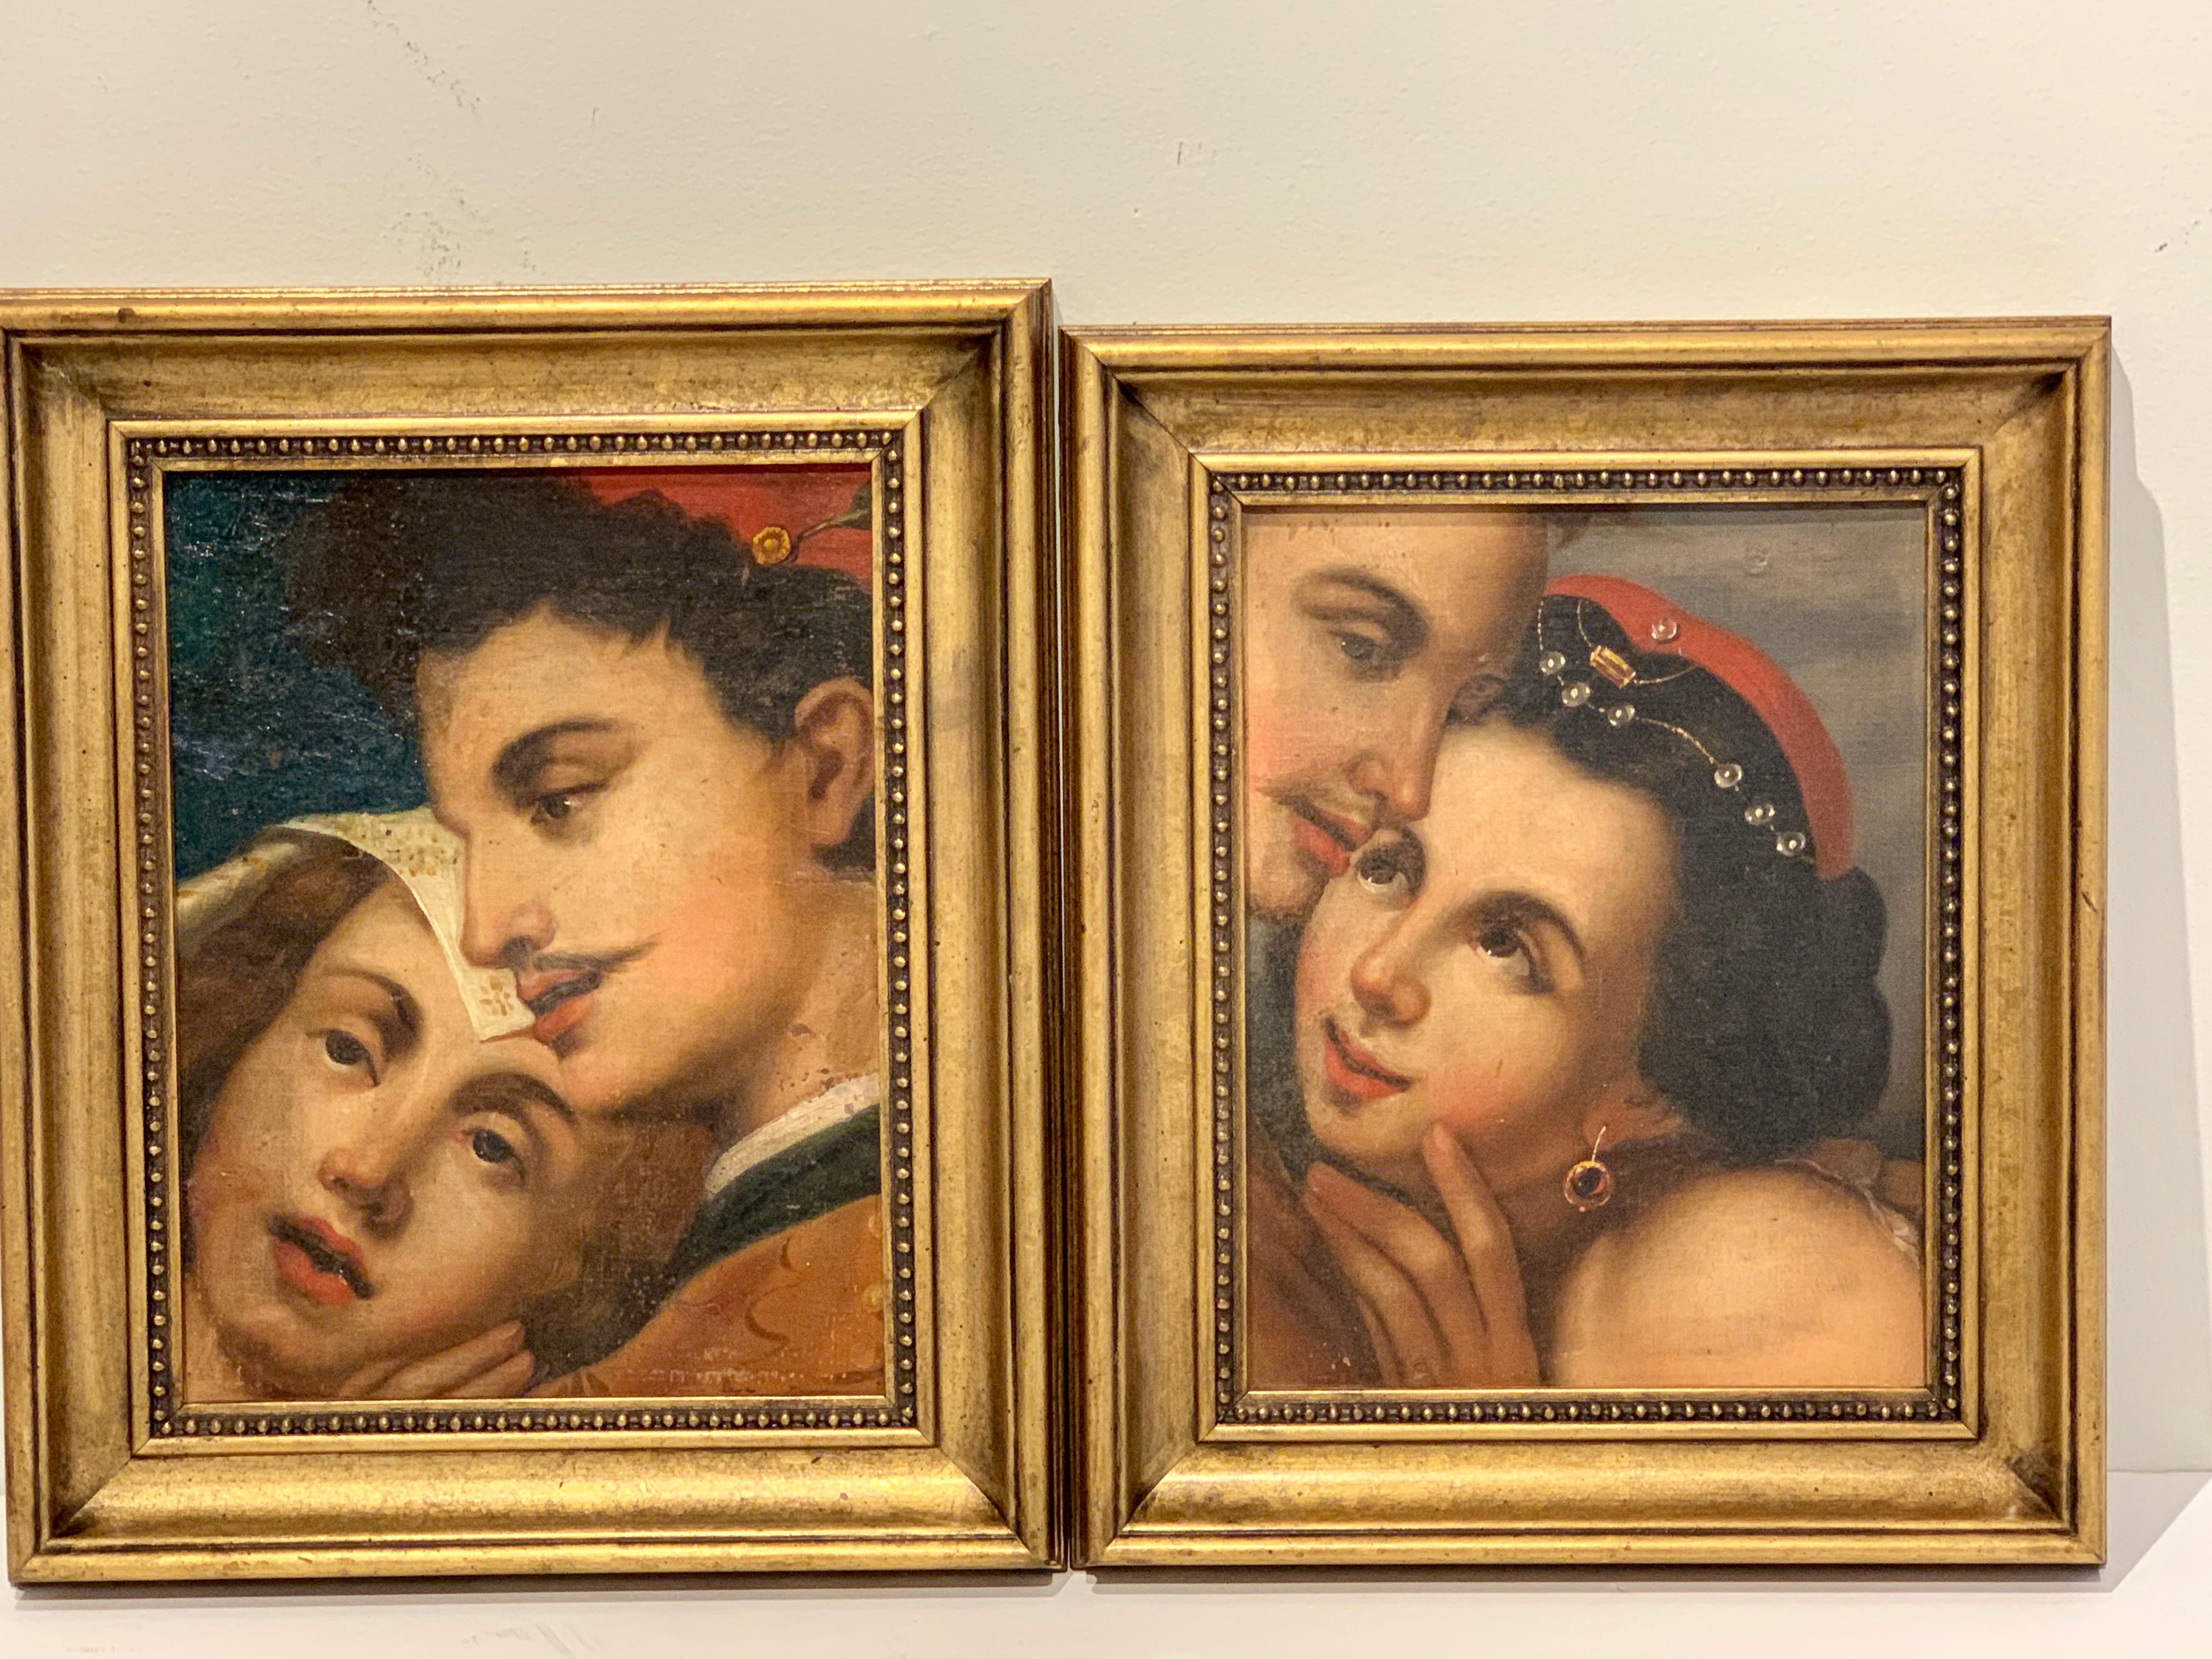 Near pair of old master romantic portraits
Each one with two hugging period dressed couples, unsigned
Measures: Male facing right
8